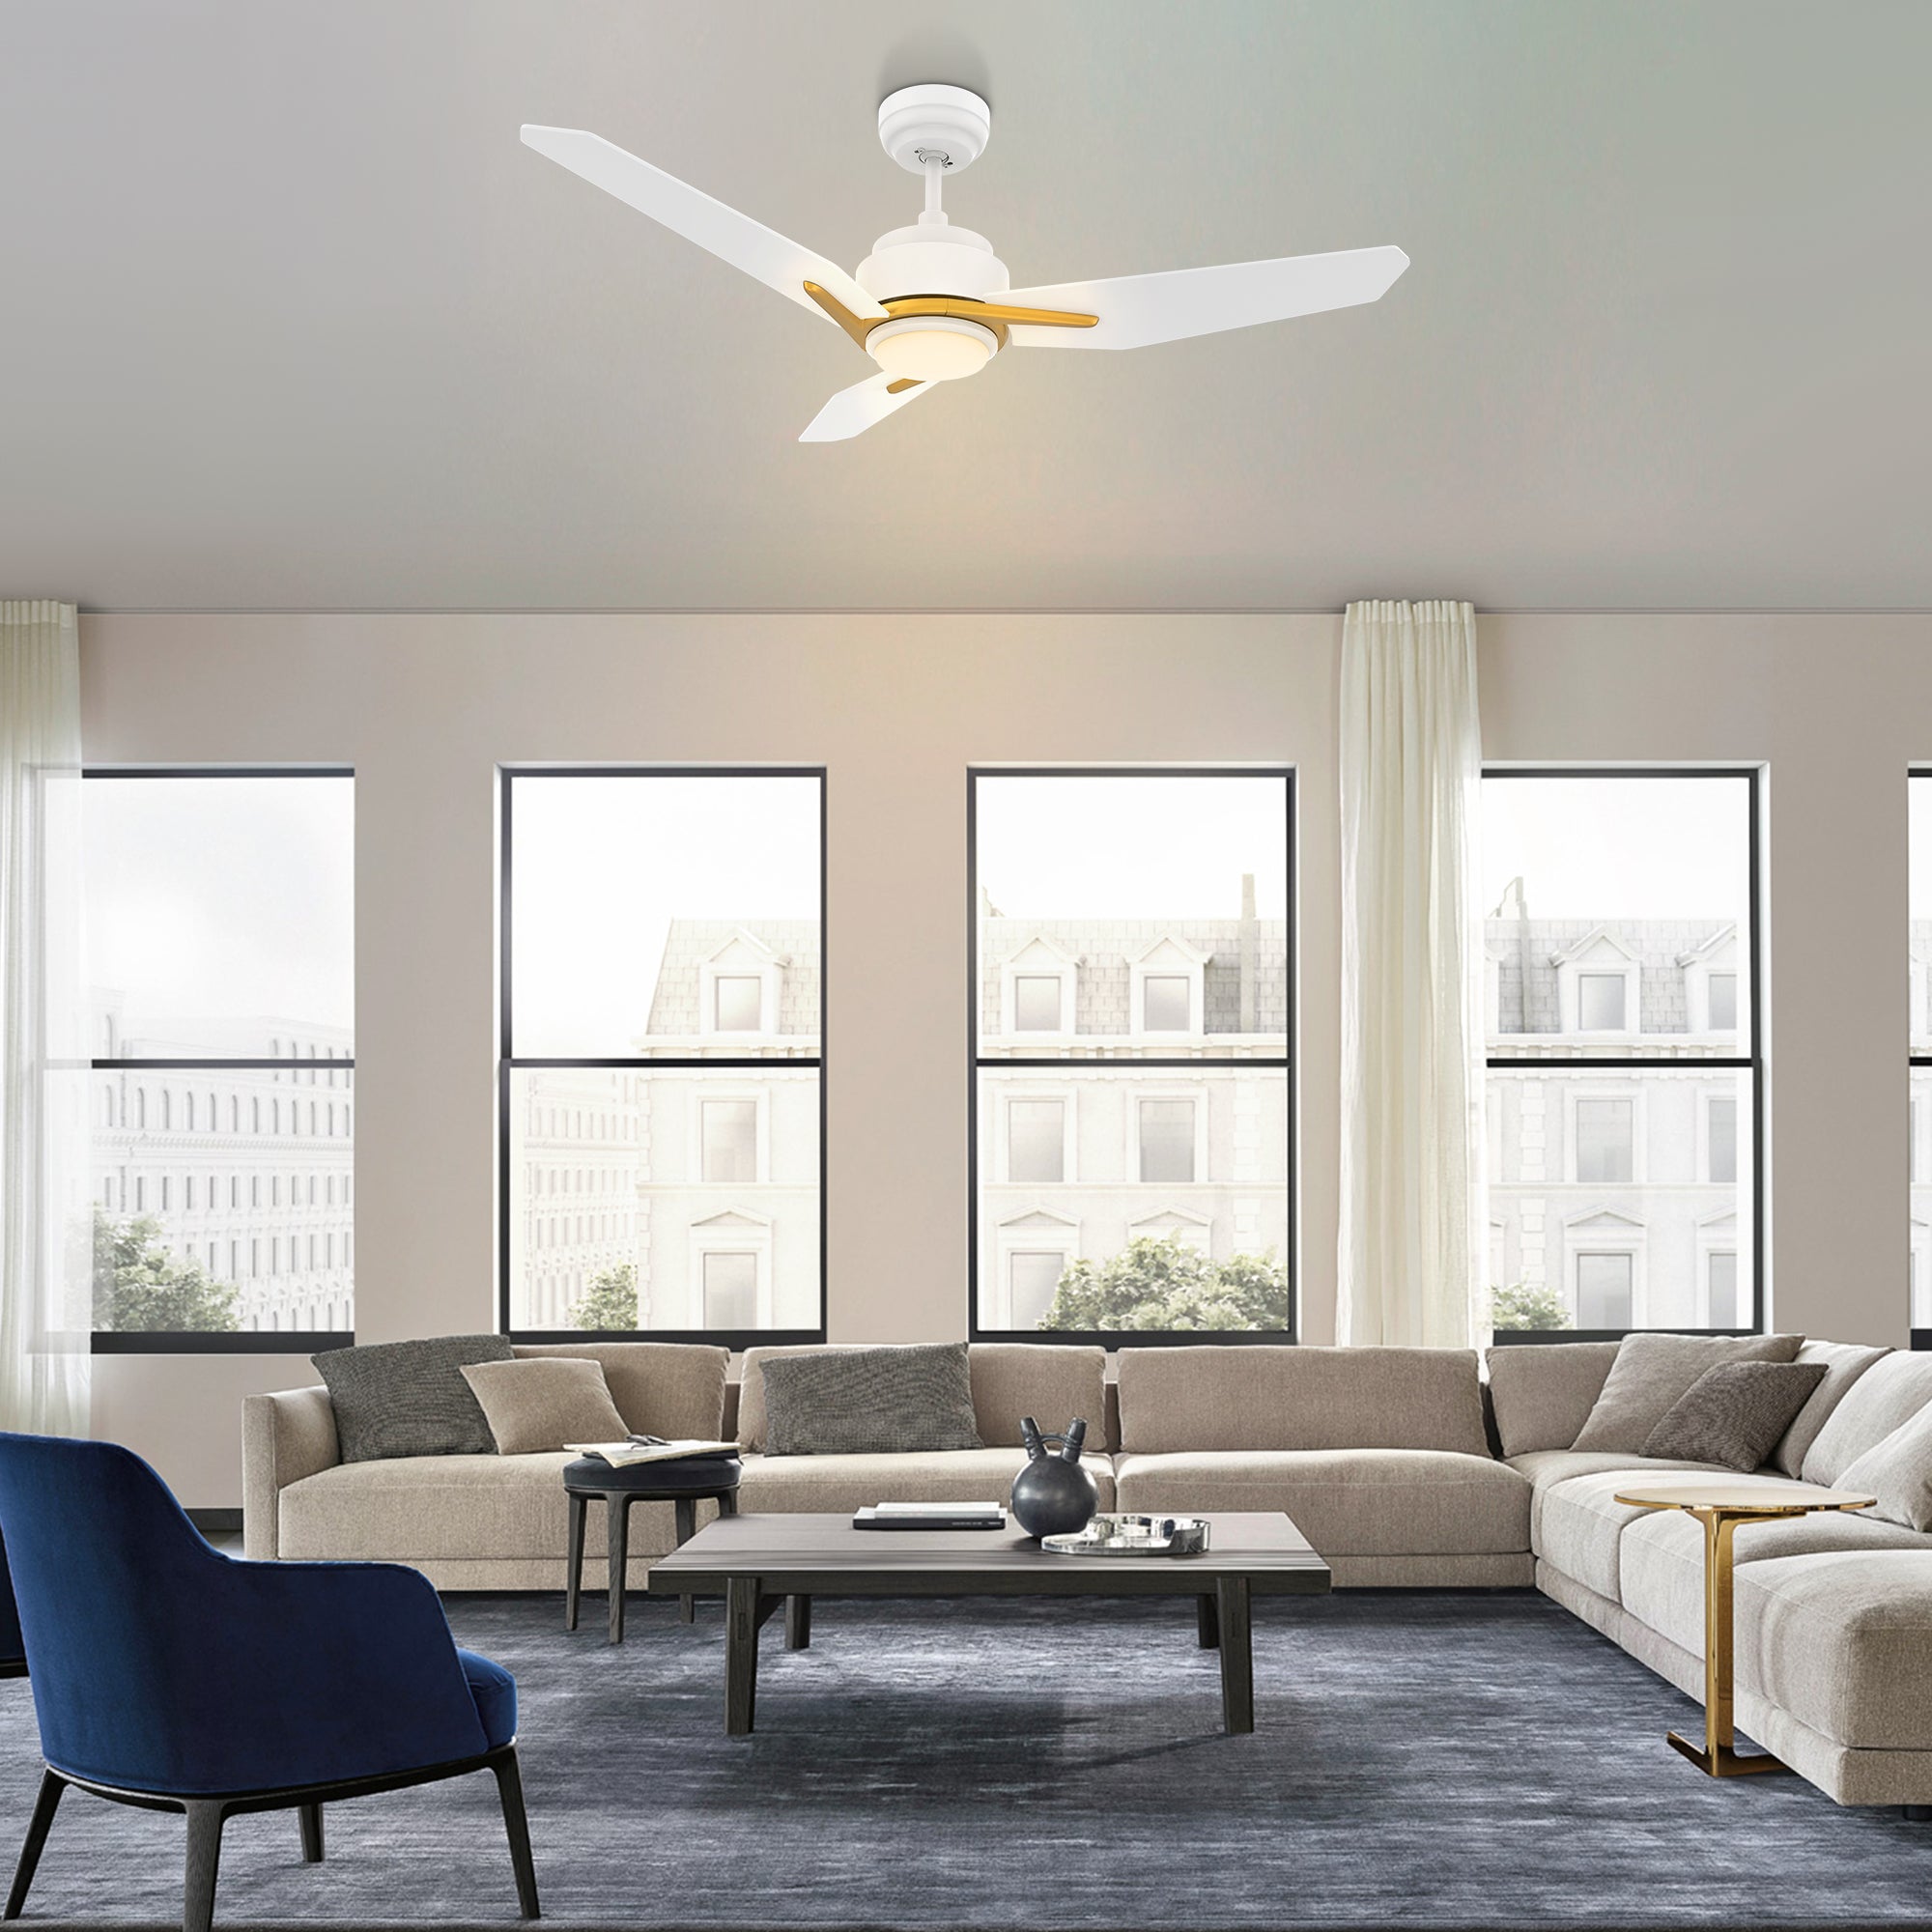 This Tilbury 48&#39;&#39; smart ceiling fan keeps your space cool, bright, and stylish. It is a soft modern masterpiece perfect for your large indoor living spaces. This Wifi smart ceiling fan is a simplicity designing with White finish, use elegant Plywood blades and has an integrated 4000K LED cool light. The fan features Remote control, Wi-Fi apps, Siri Shortcut and Voice control technology (compatible with Amazon Alexa and Google Home Assistant ) to set fan preferences.